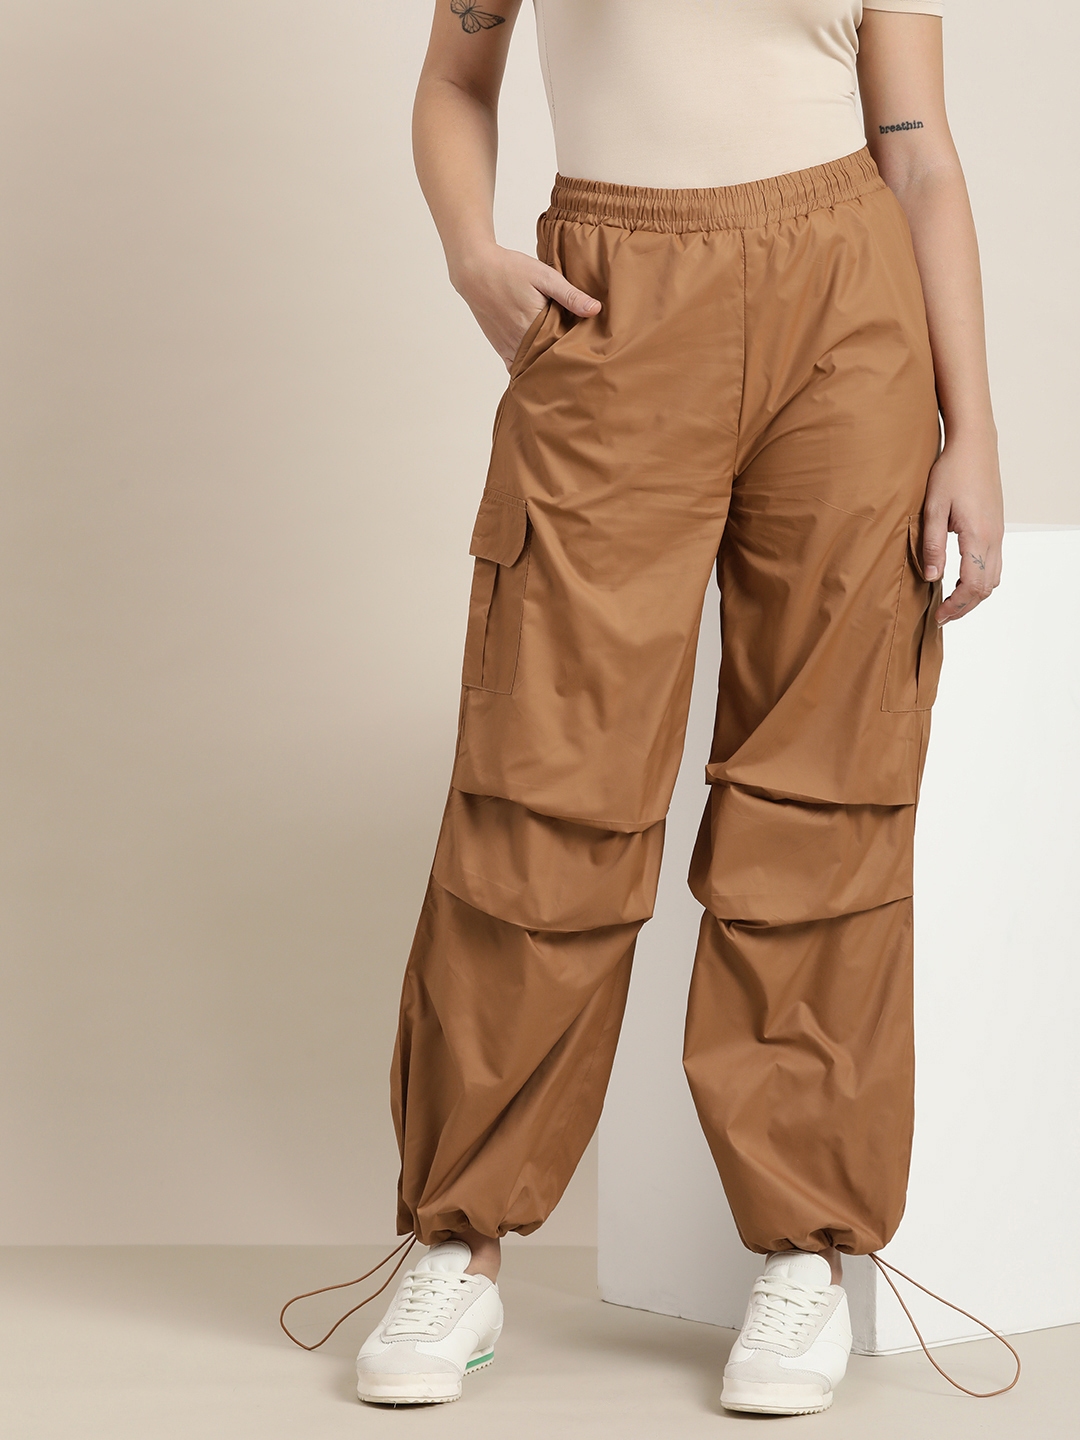 Track Pants For Women Myntra Hotsell